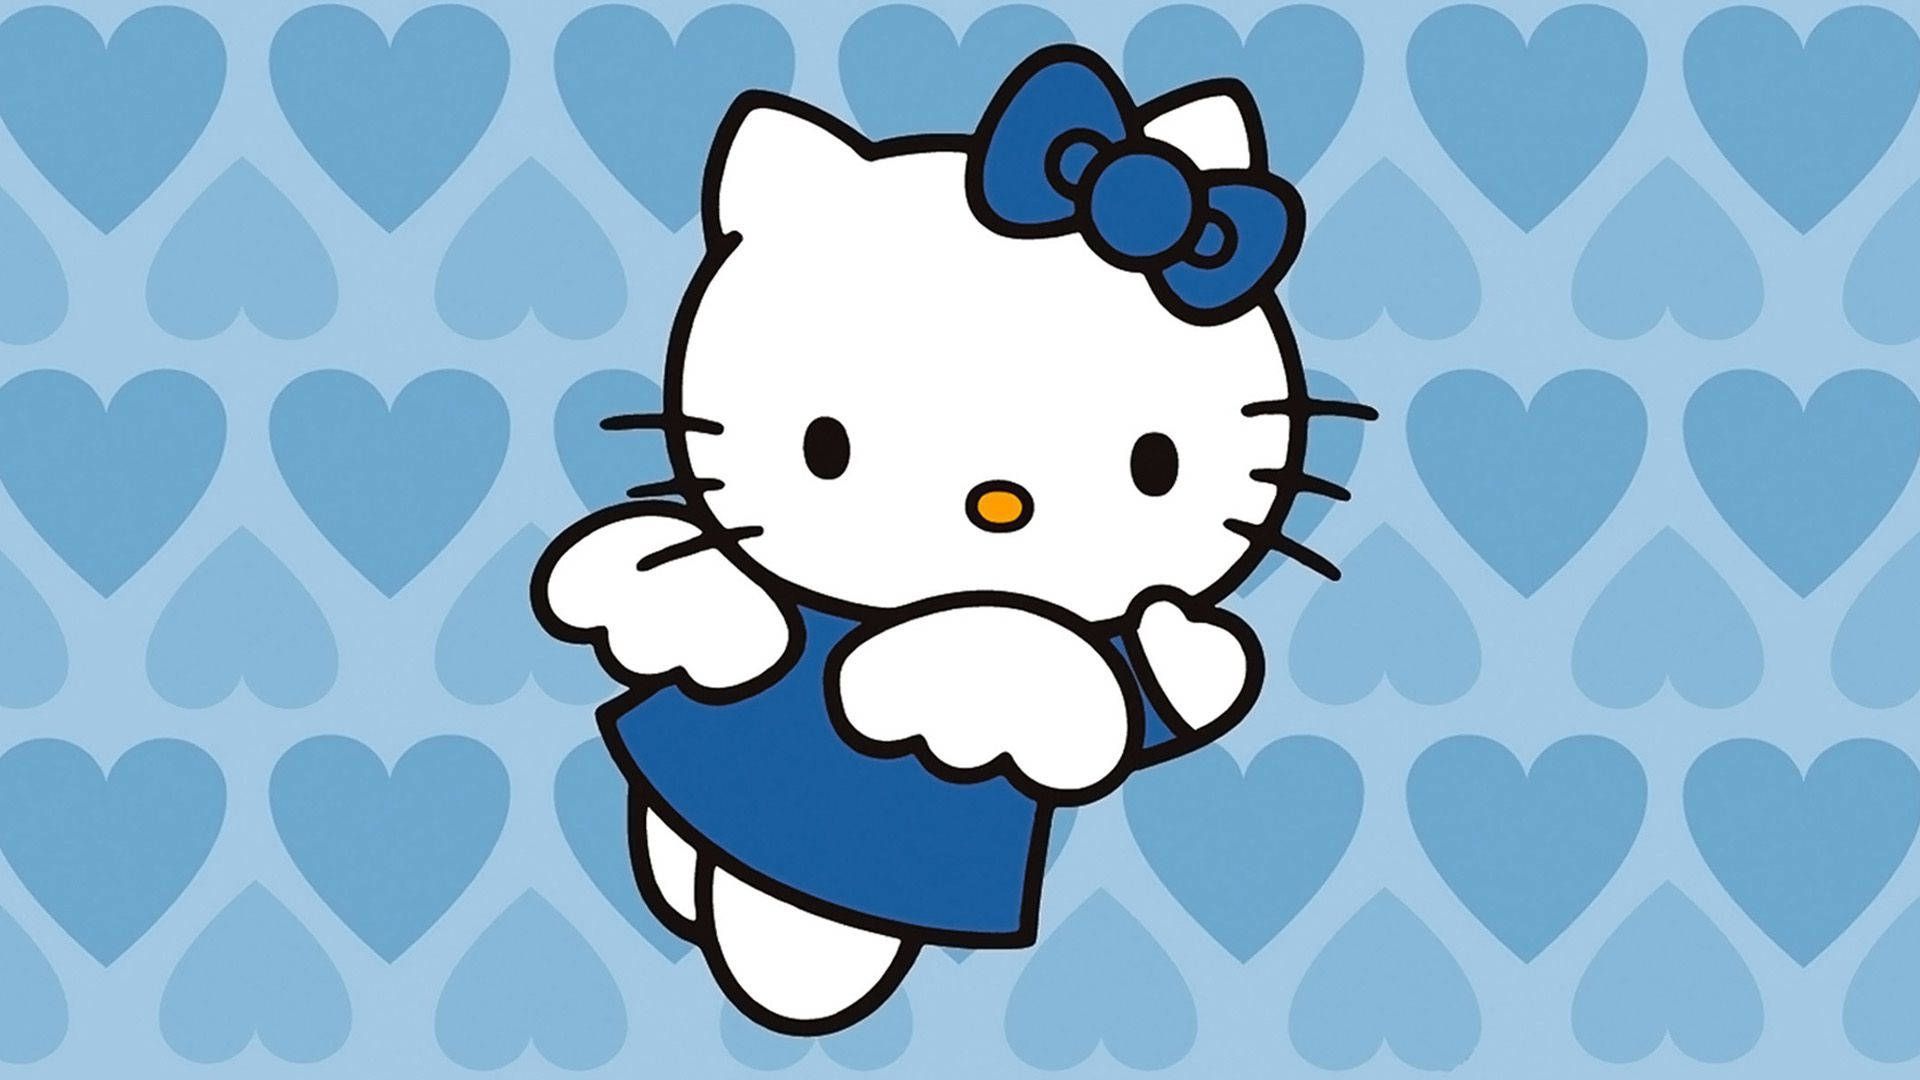 A hello kitty with wings and blue dress - Hello Kitty